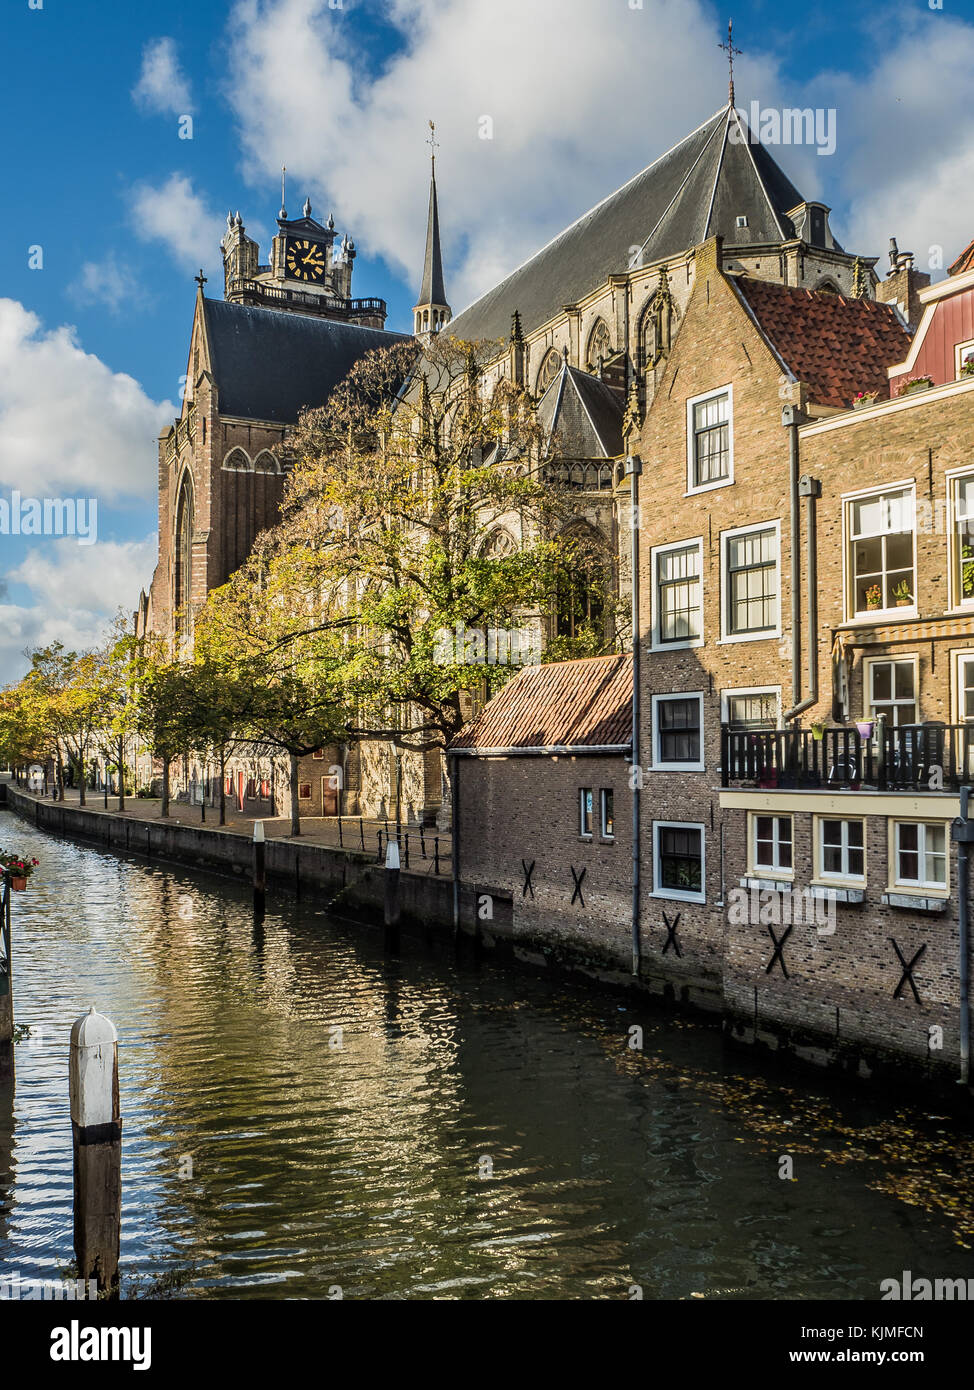 The Grote Kerk in Dordrecht is located next to the Voorstraatshaven, a canal through the historic city center. Stock Photo